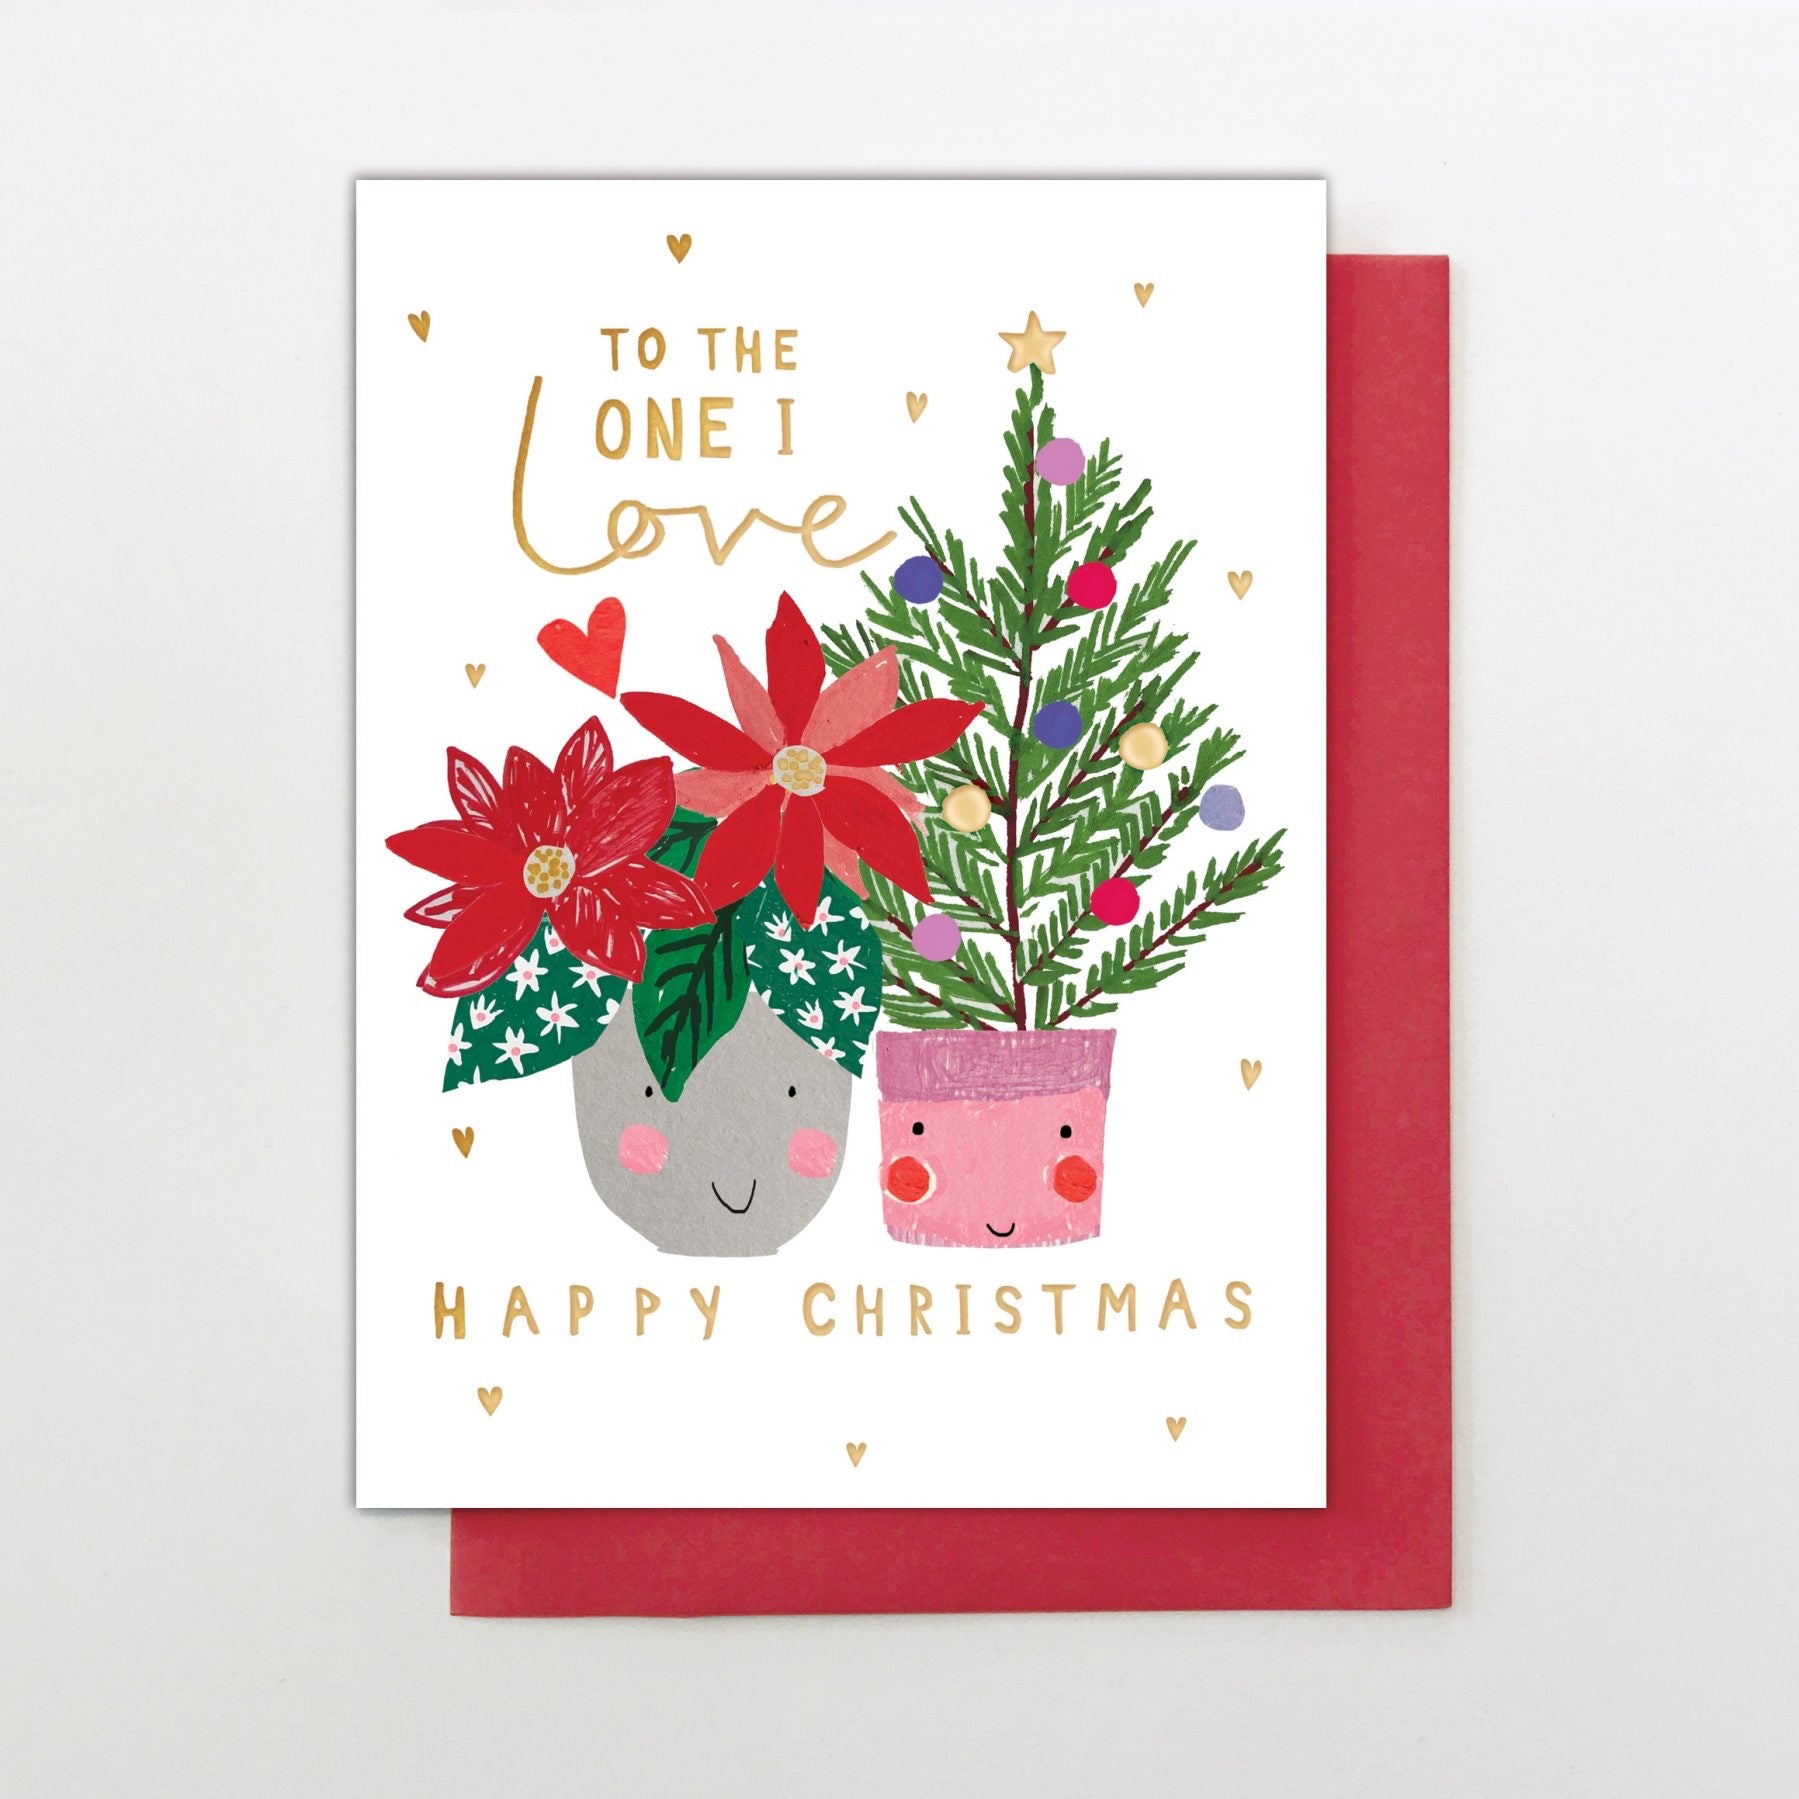 To The One I Love - Happy Christmas